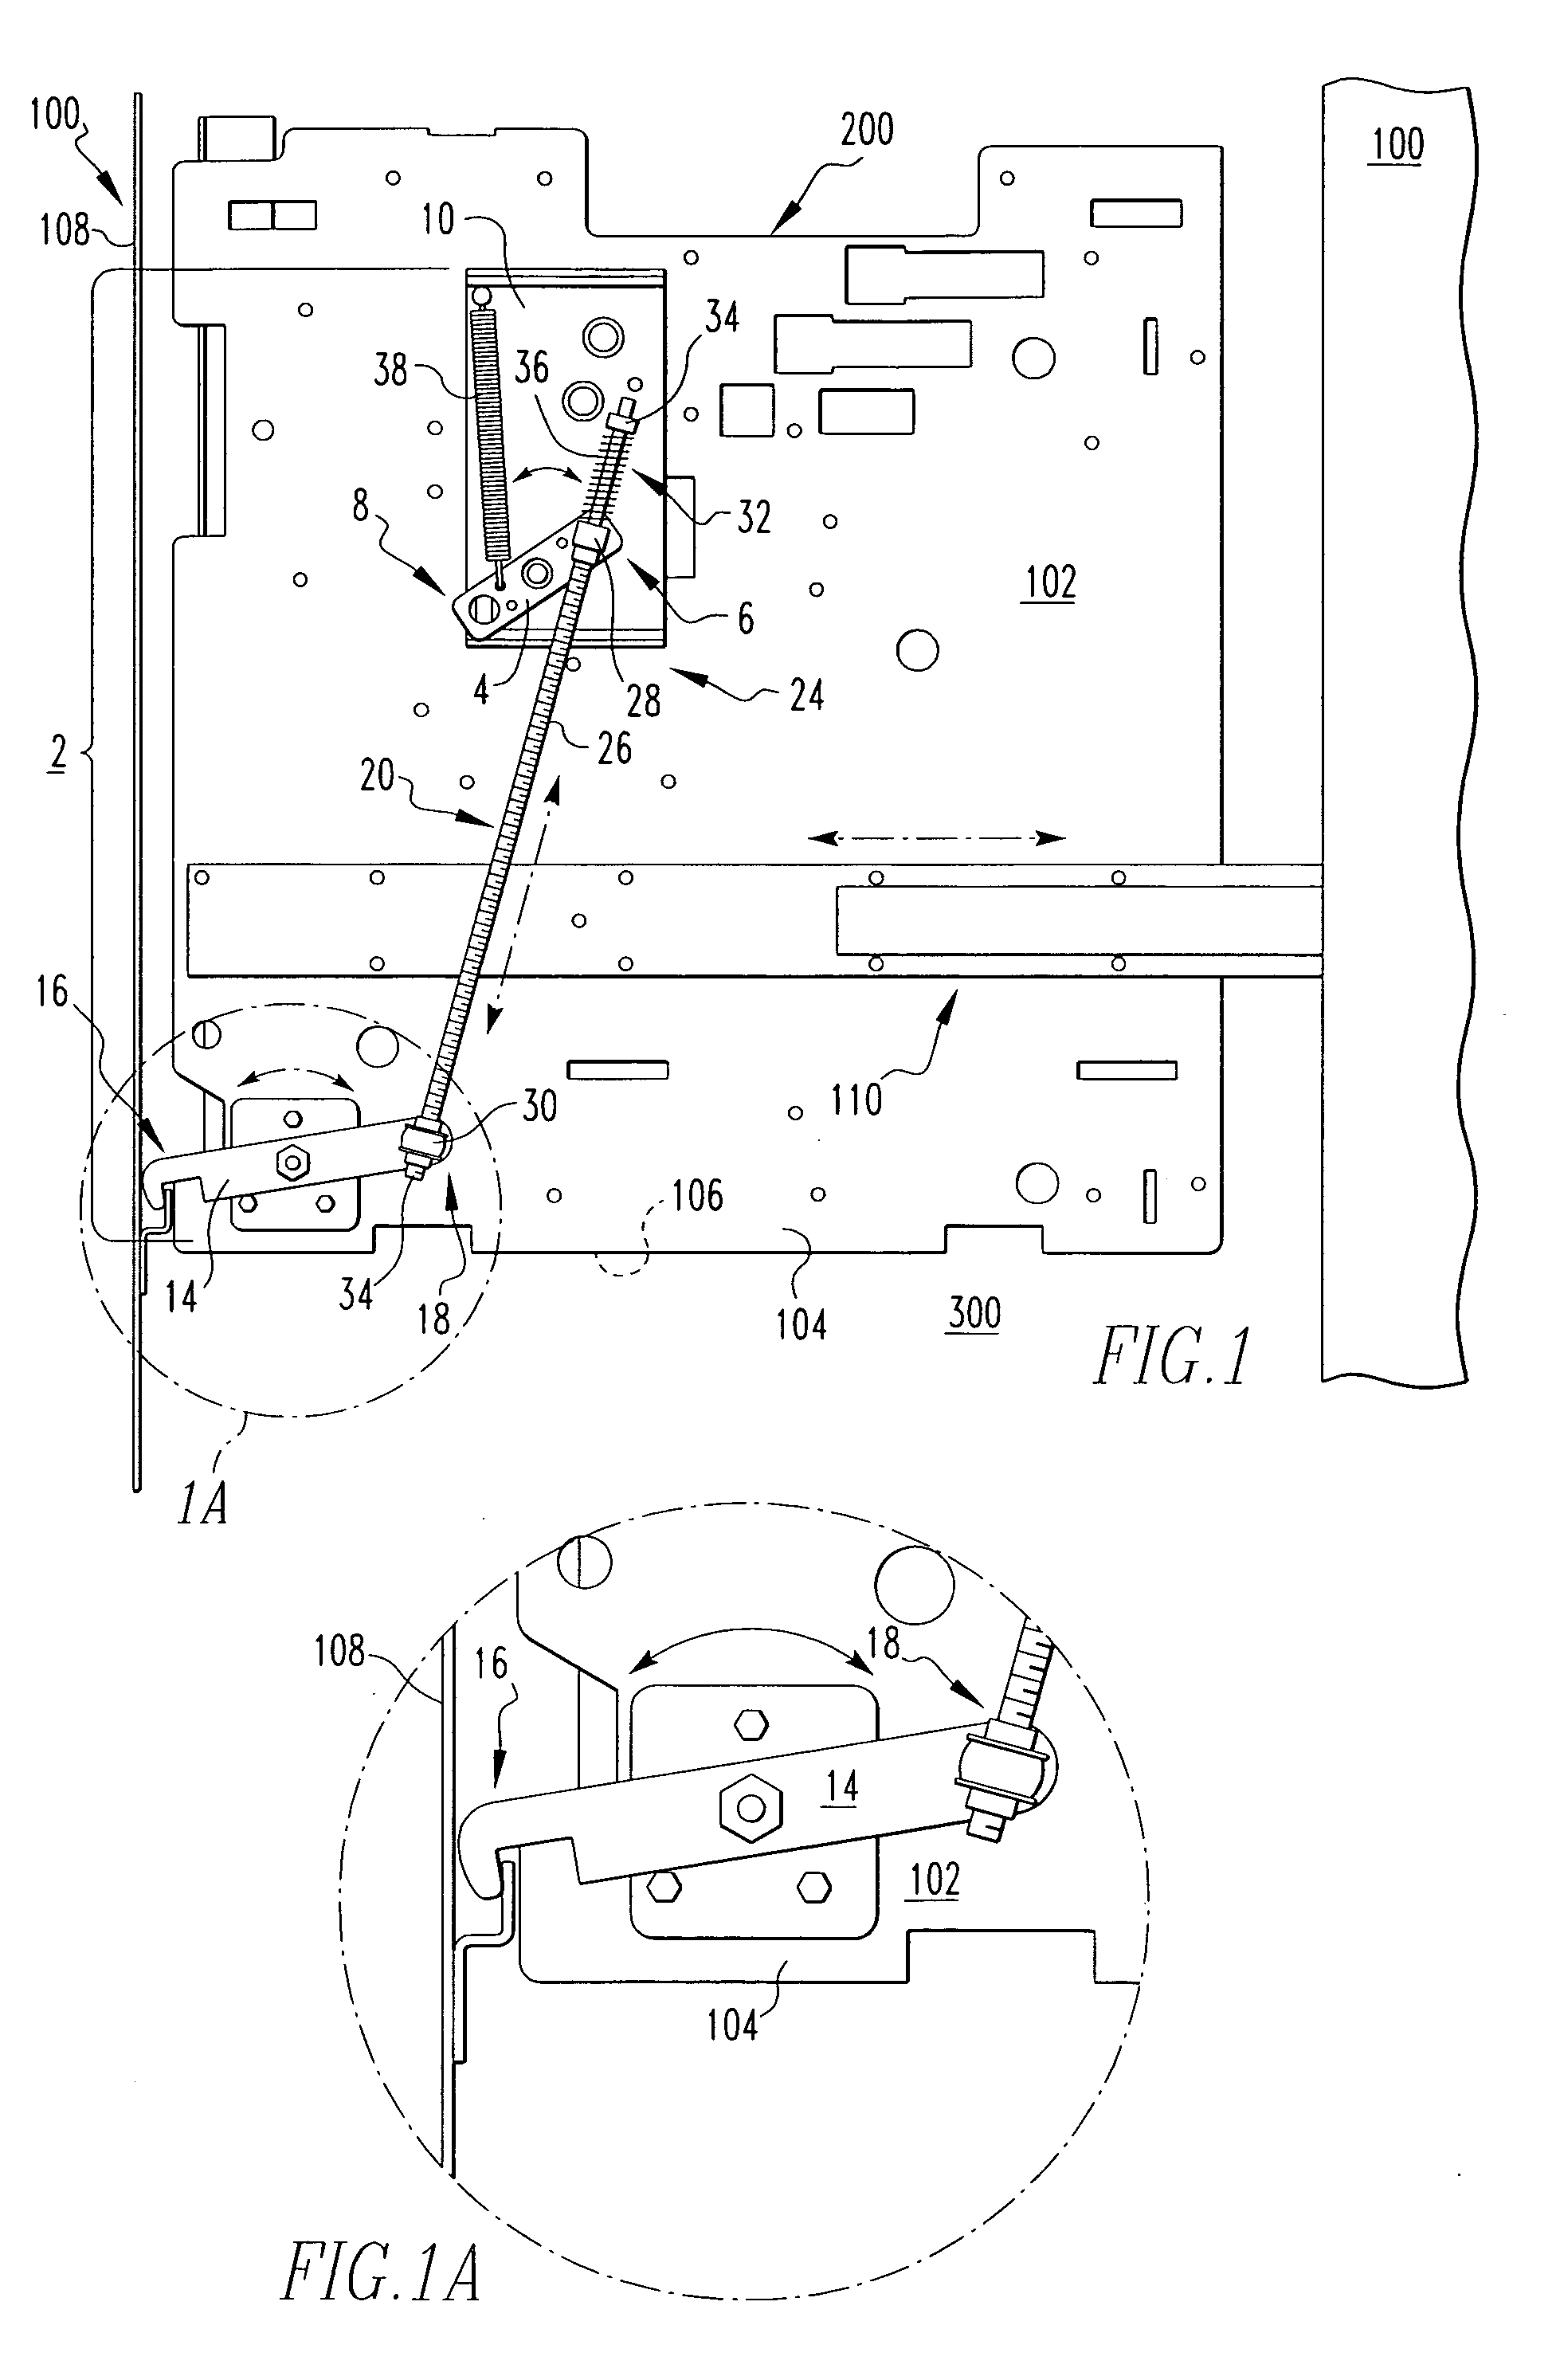 Door interlock assembly and draw-out circuit breaker assembly employing the same